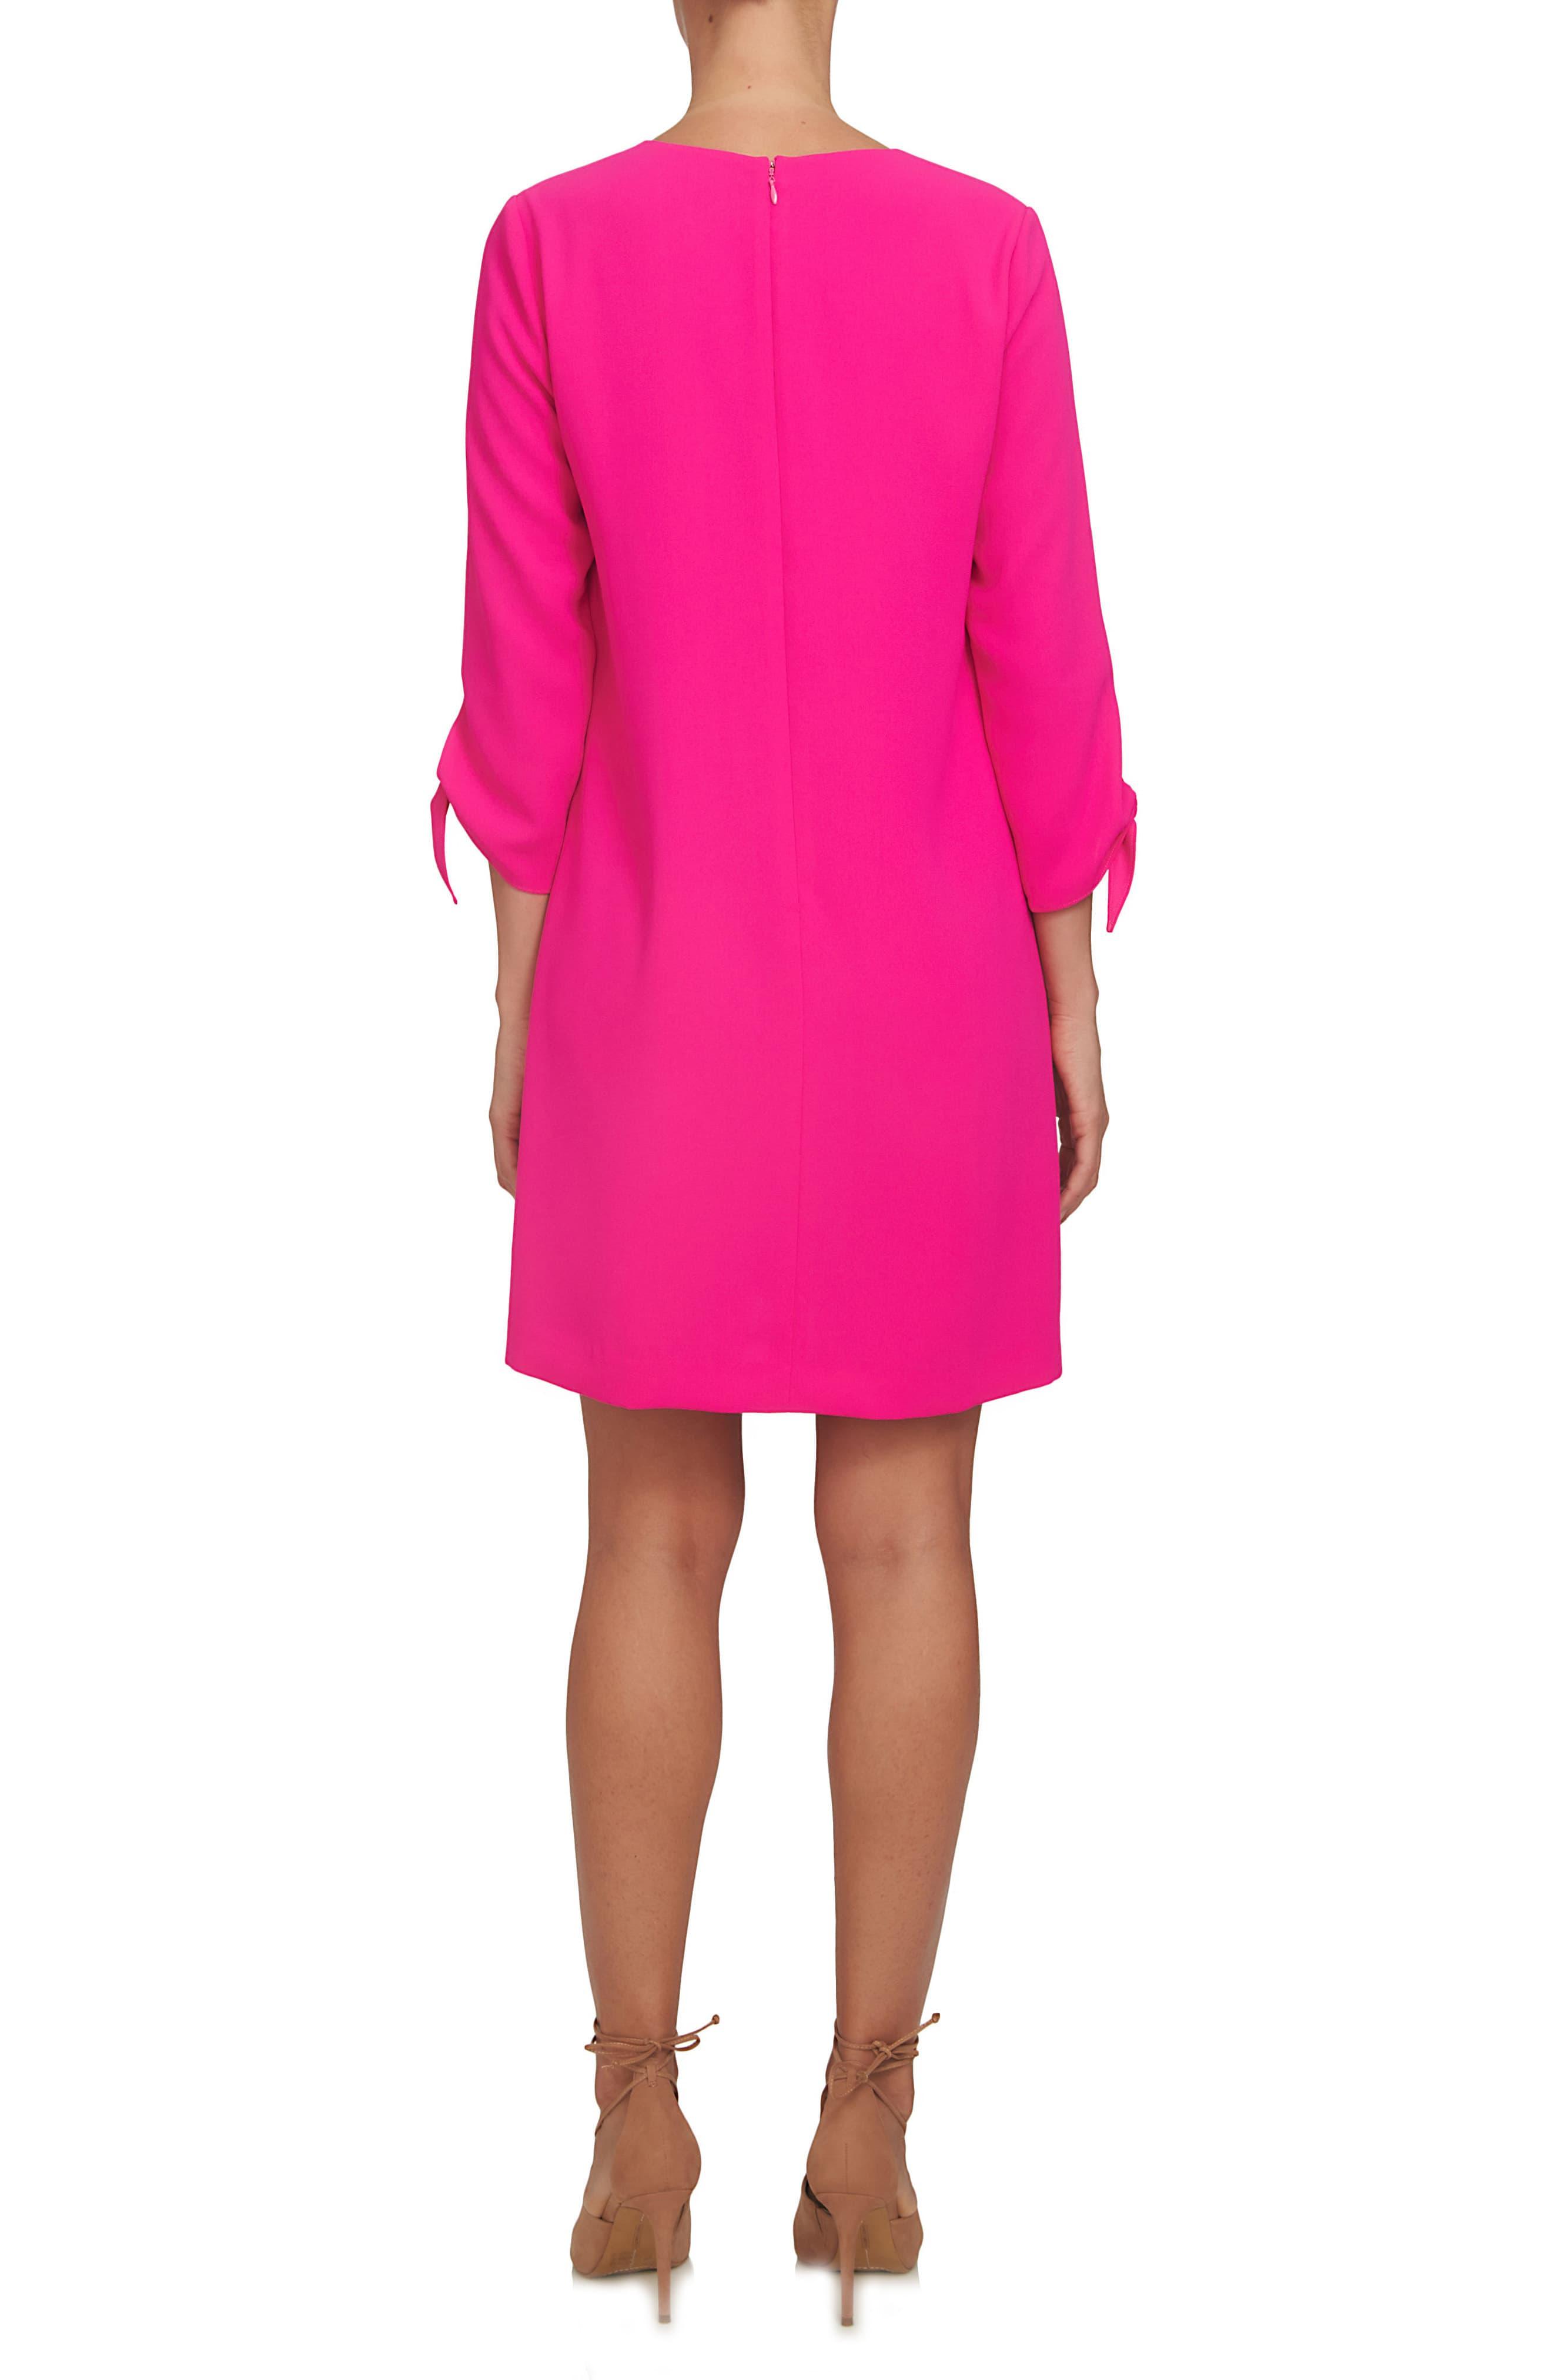 Cece Synthetic Tie Sleeve Shift Dress in Hot Magenta (Pink) - Save 30% ...